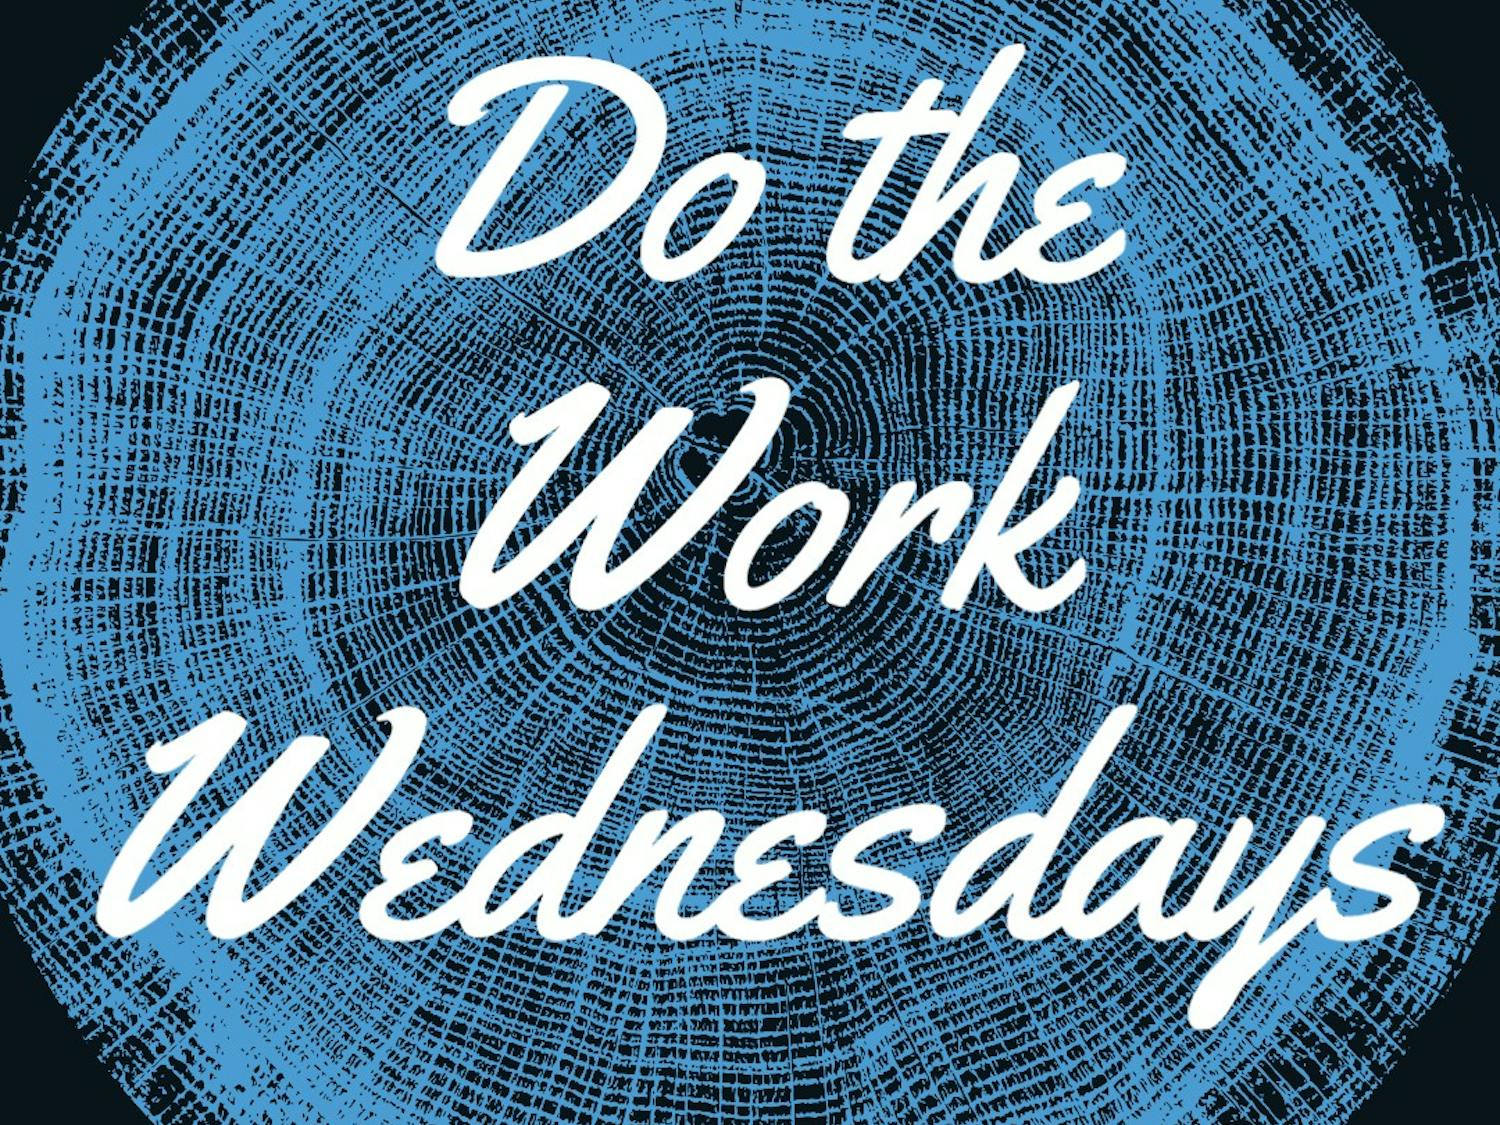 The logo for the Do the Work Wednesdays series. Courtesy of Cat Zachary.